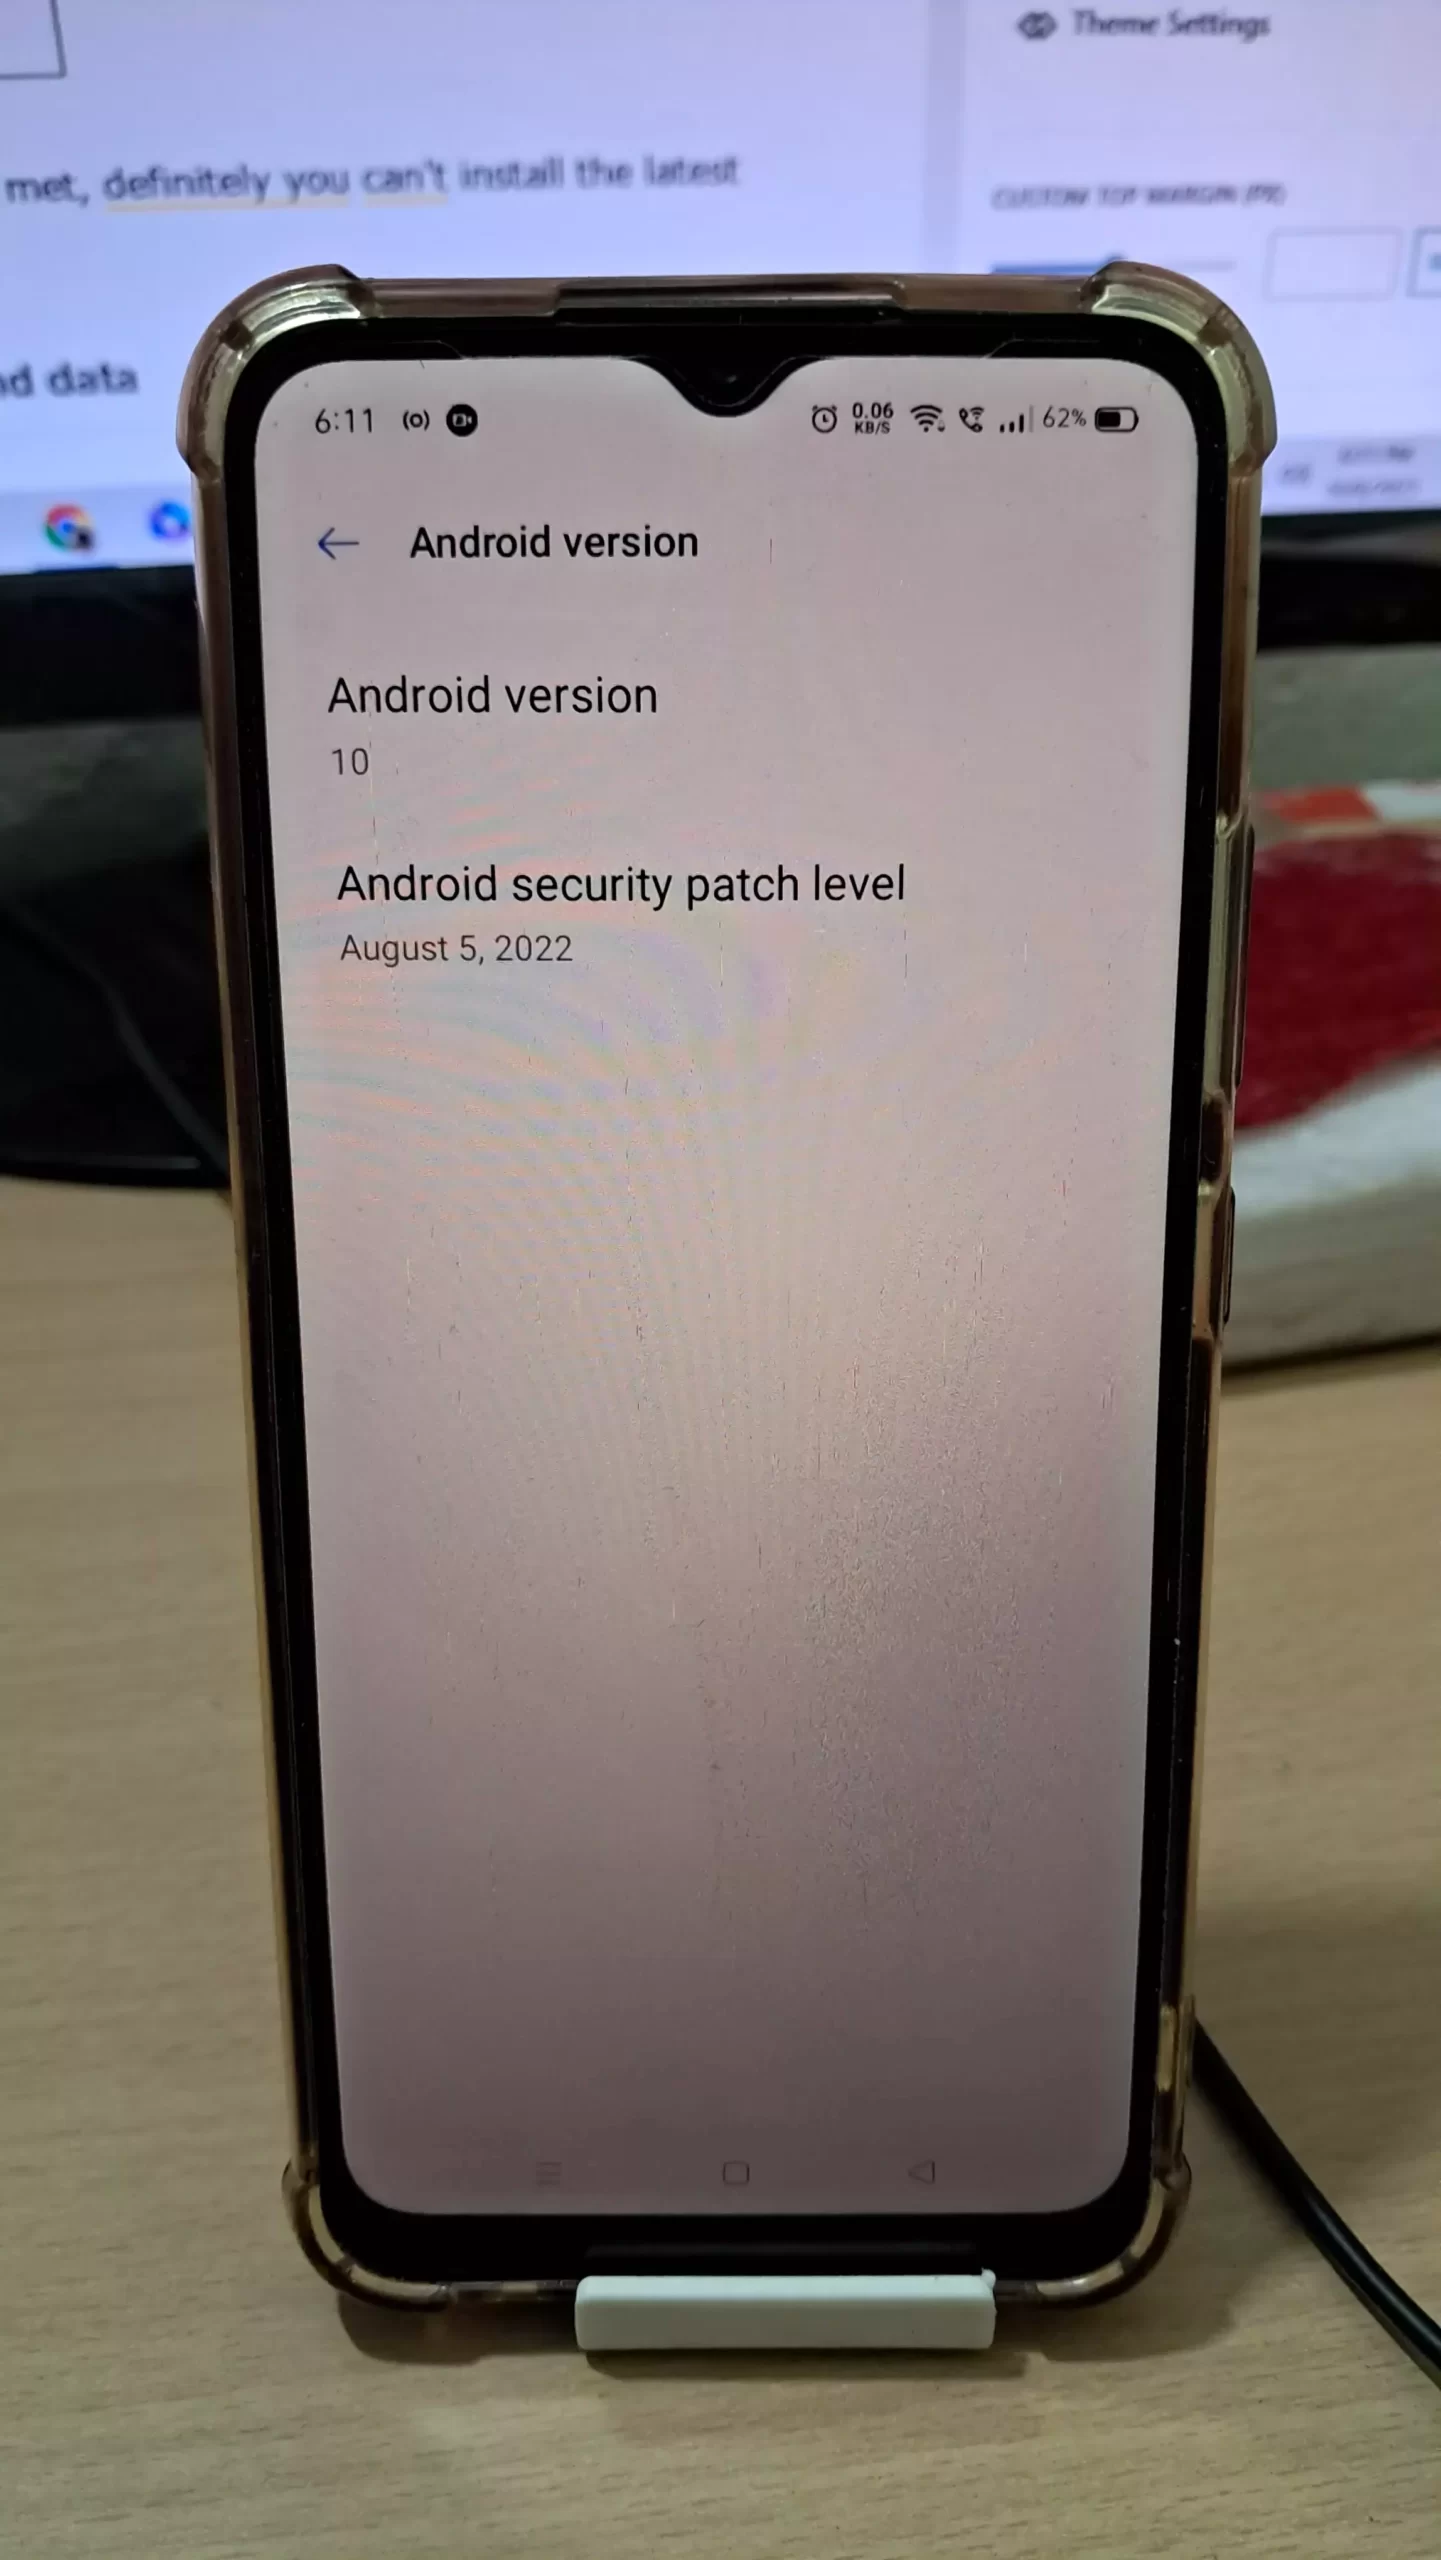 android 10 version image captured